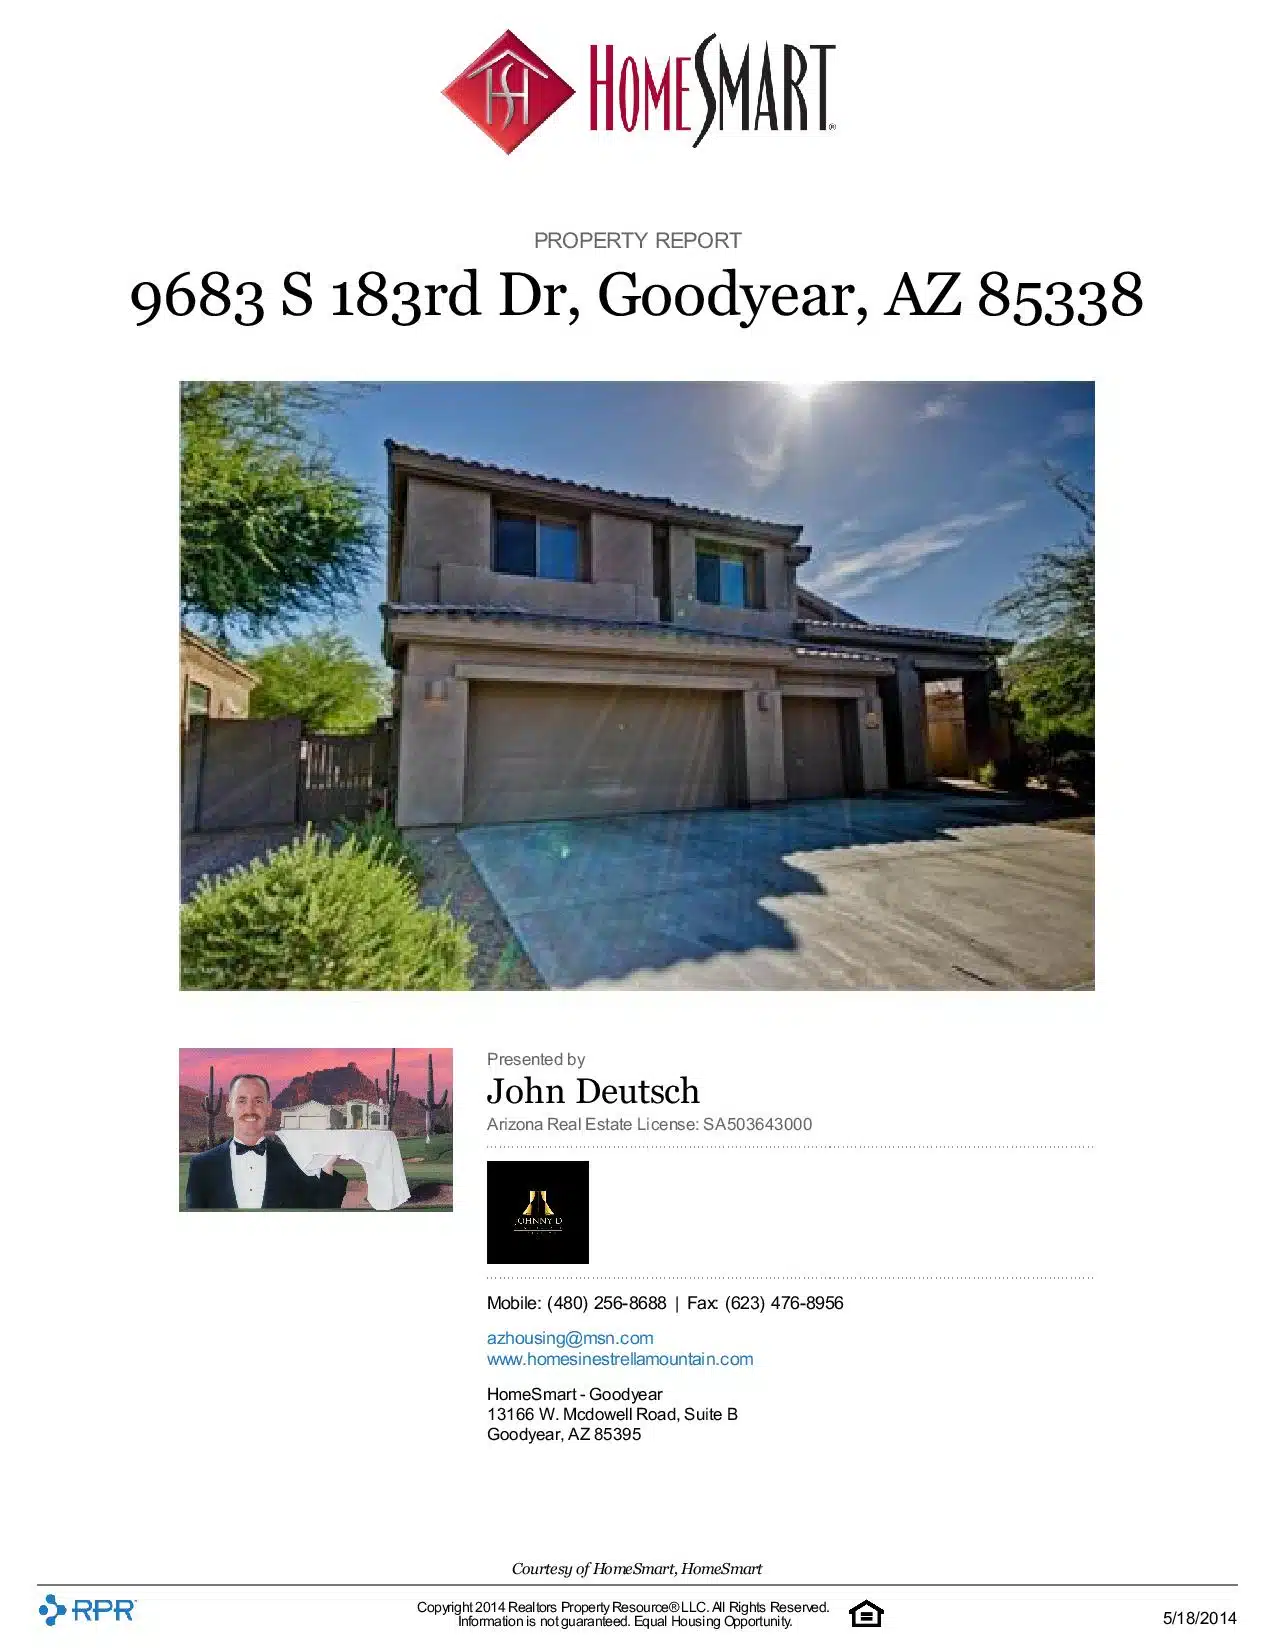 9683-S-183rd-Dr-Goodyear-AZ-85338-page-001